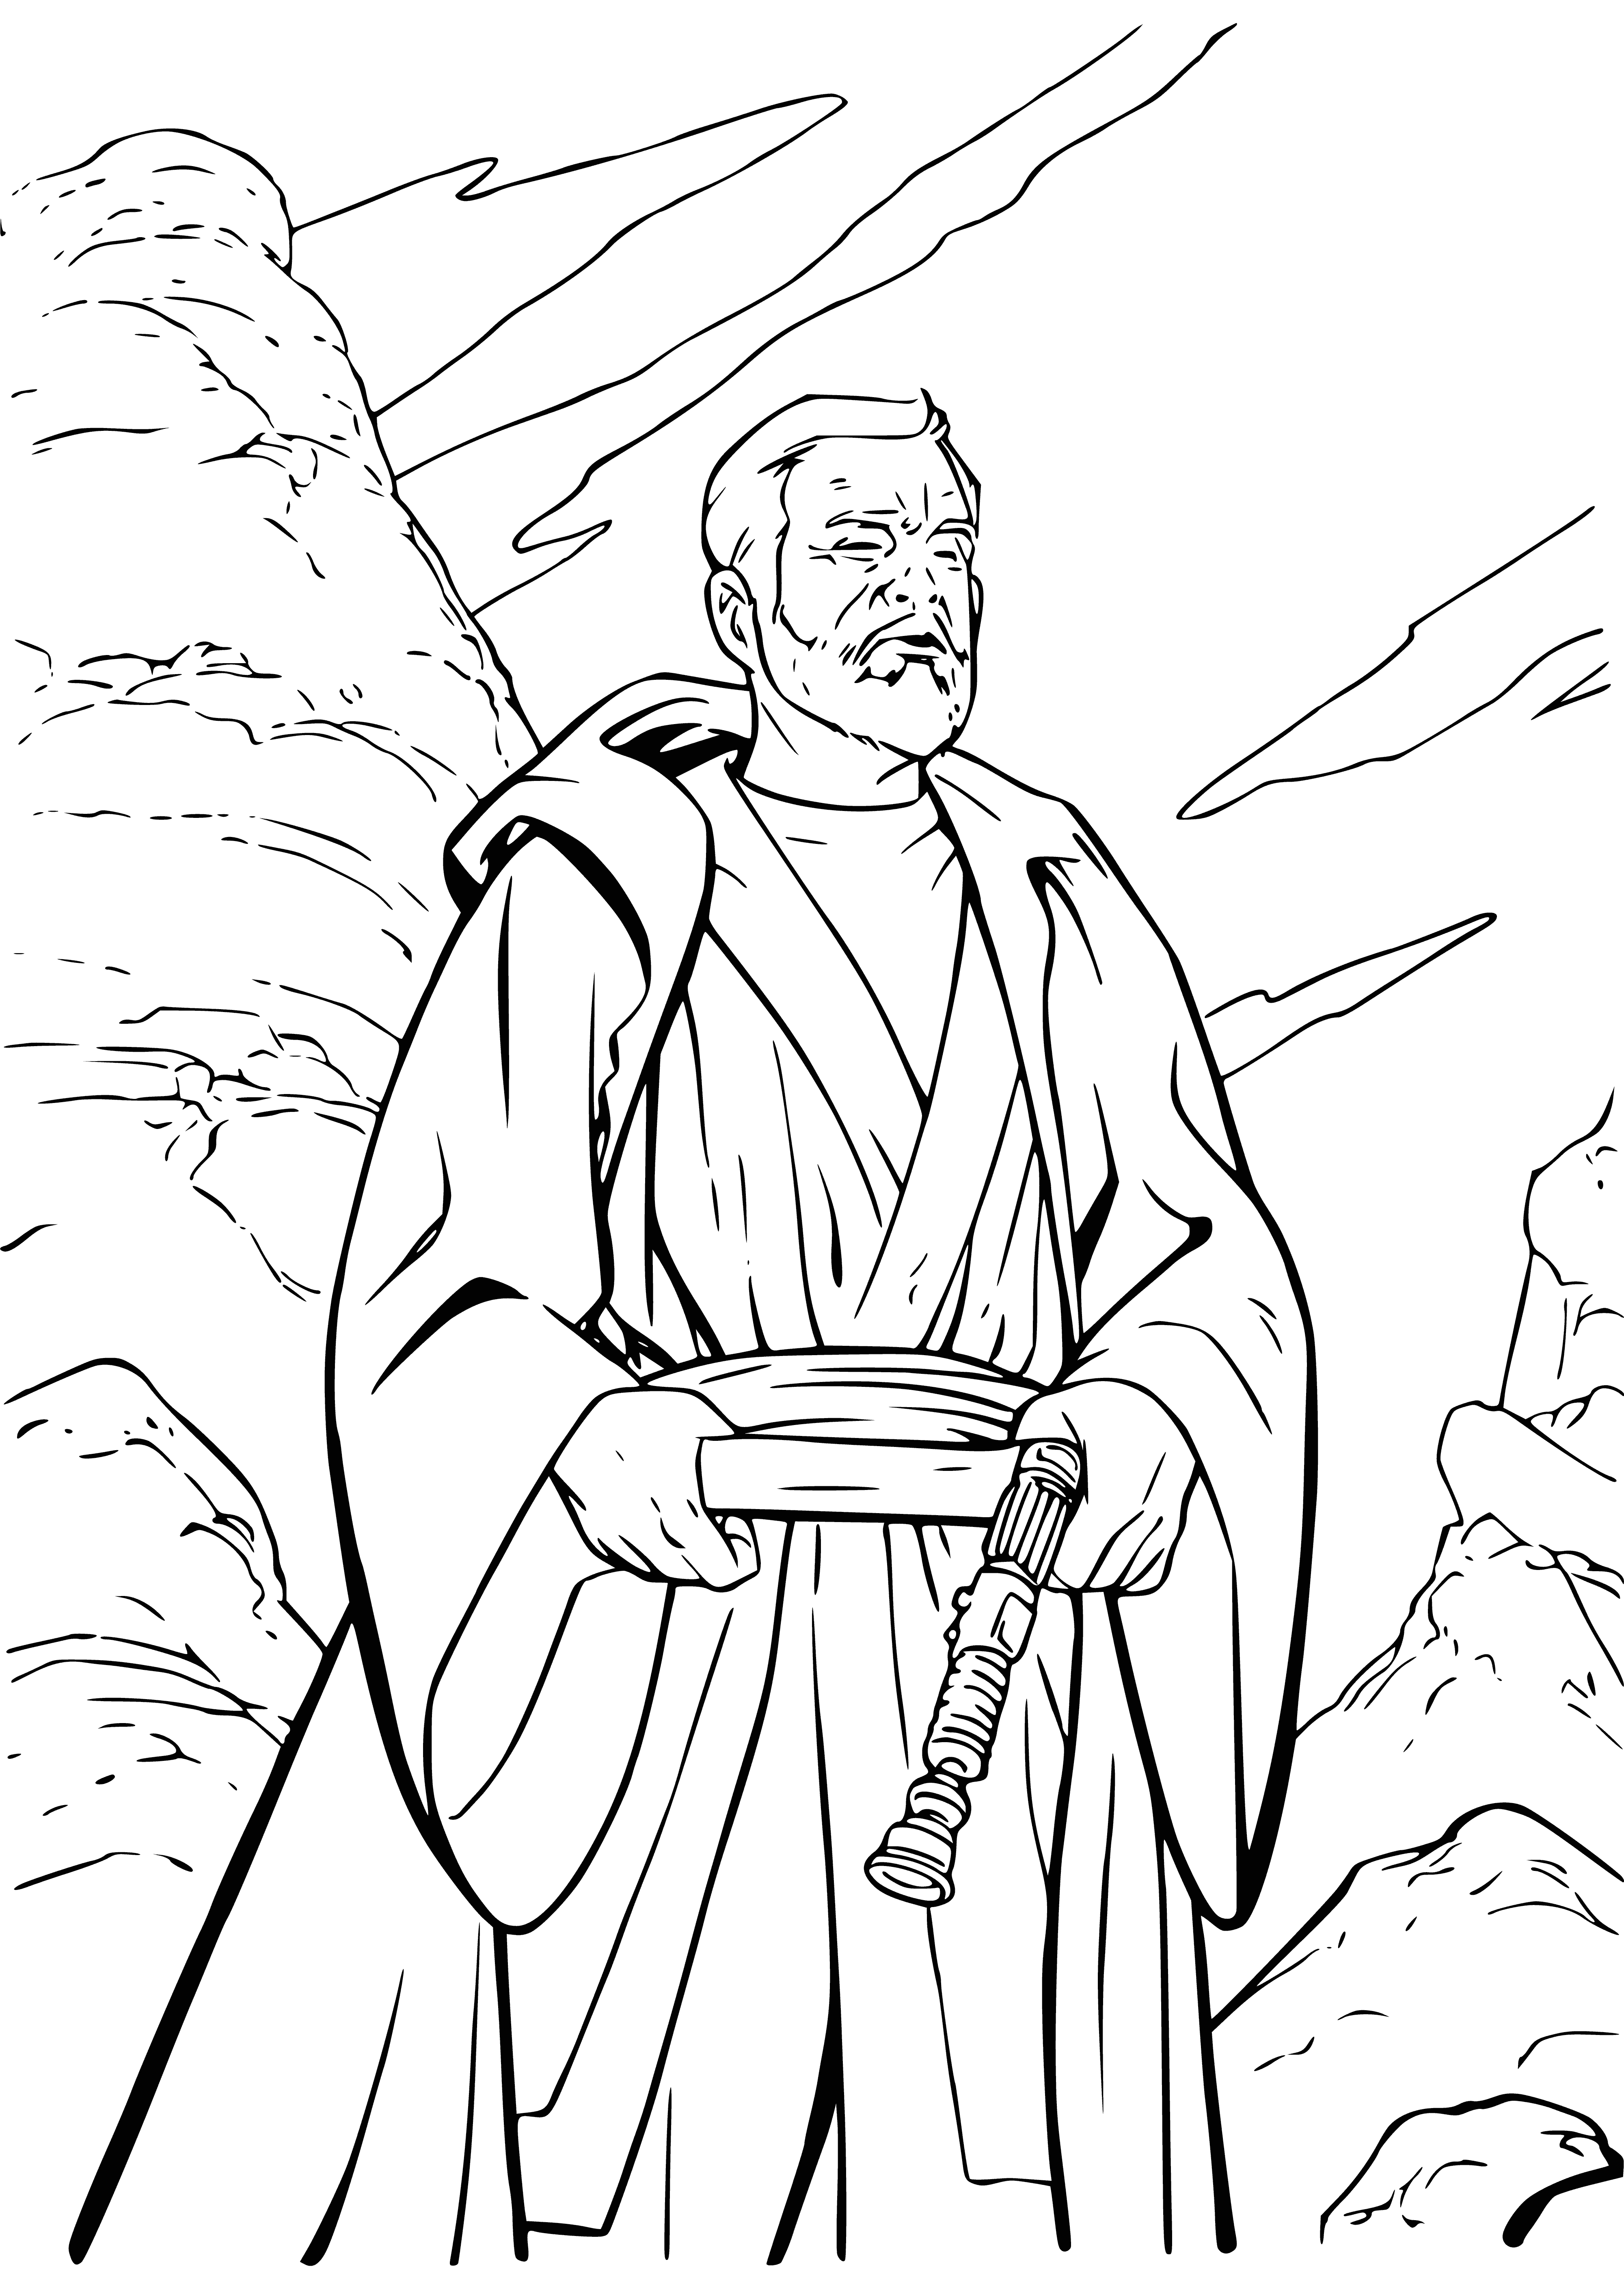 coloring page: Obi-Wan stands in a desert landscape, robed and hooded, with a lightsaber in hand, staring at a twin-sunned planet.